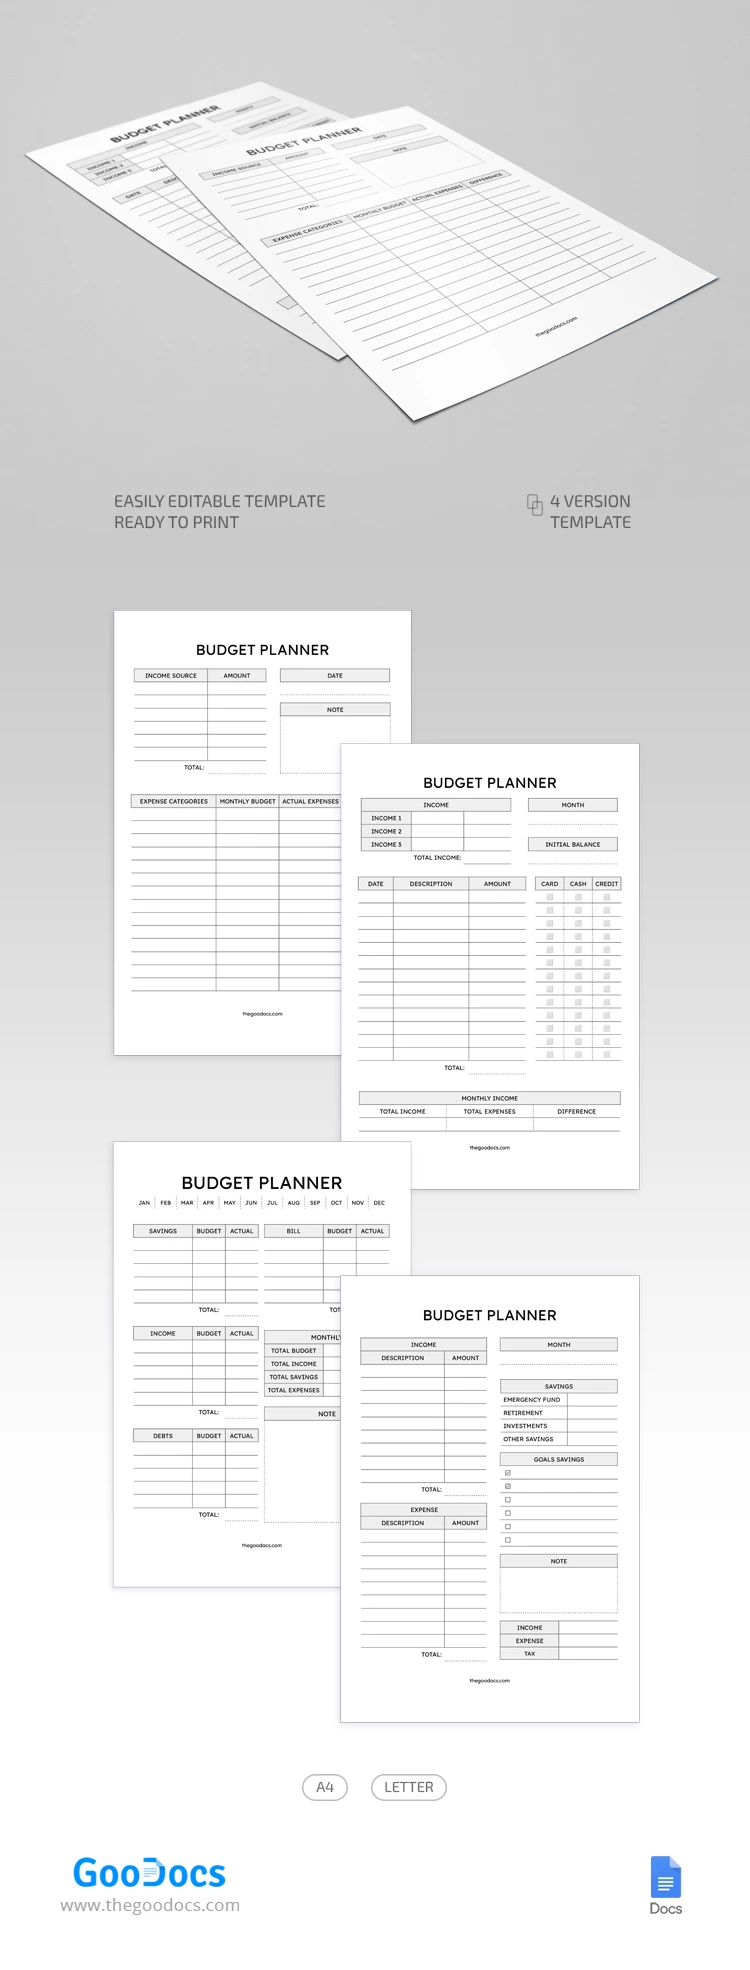 Budget personnel simple - free Google Docs Template - 10068712